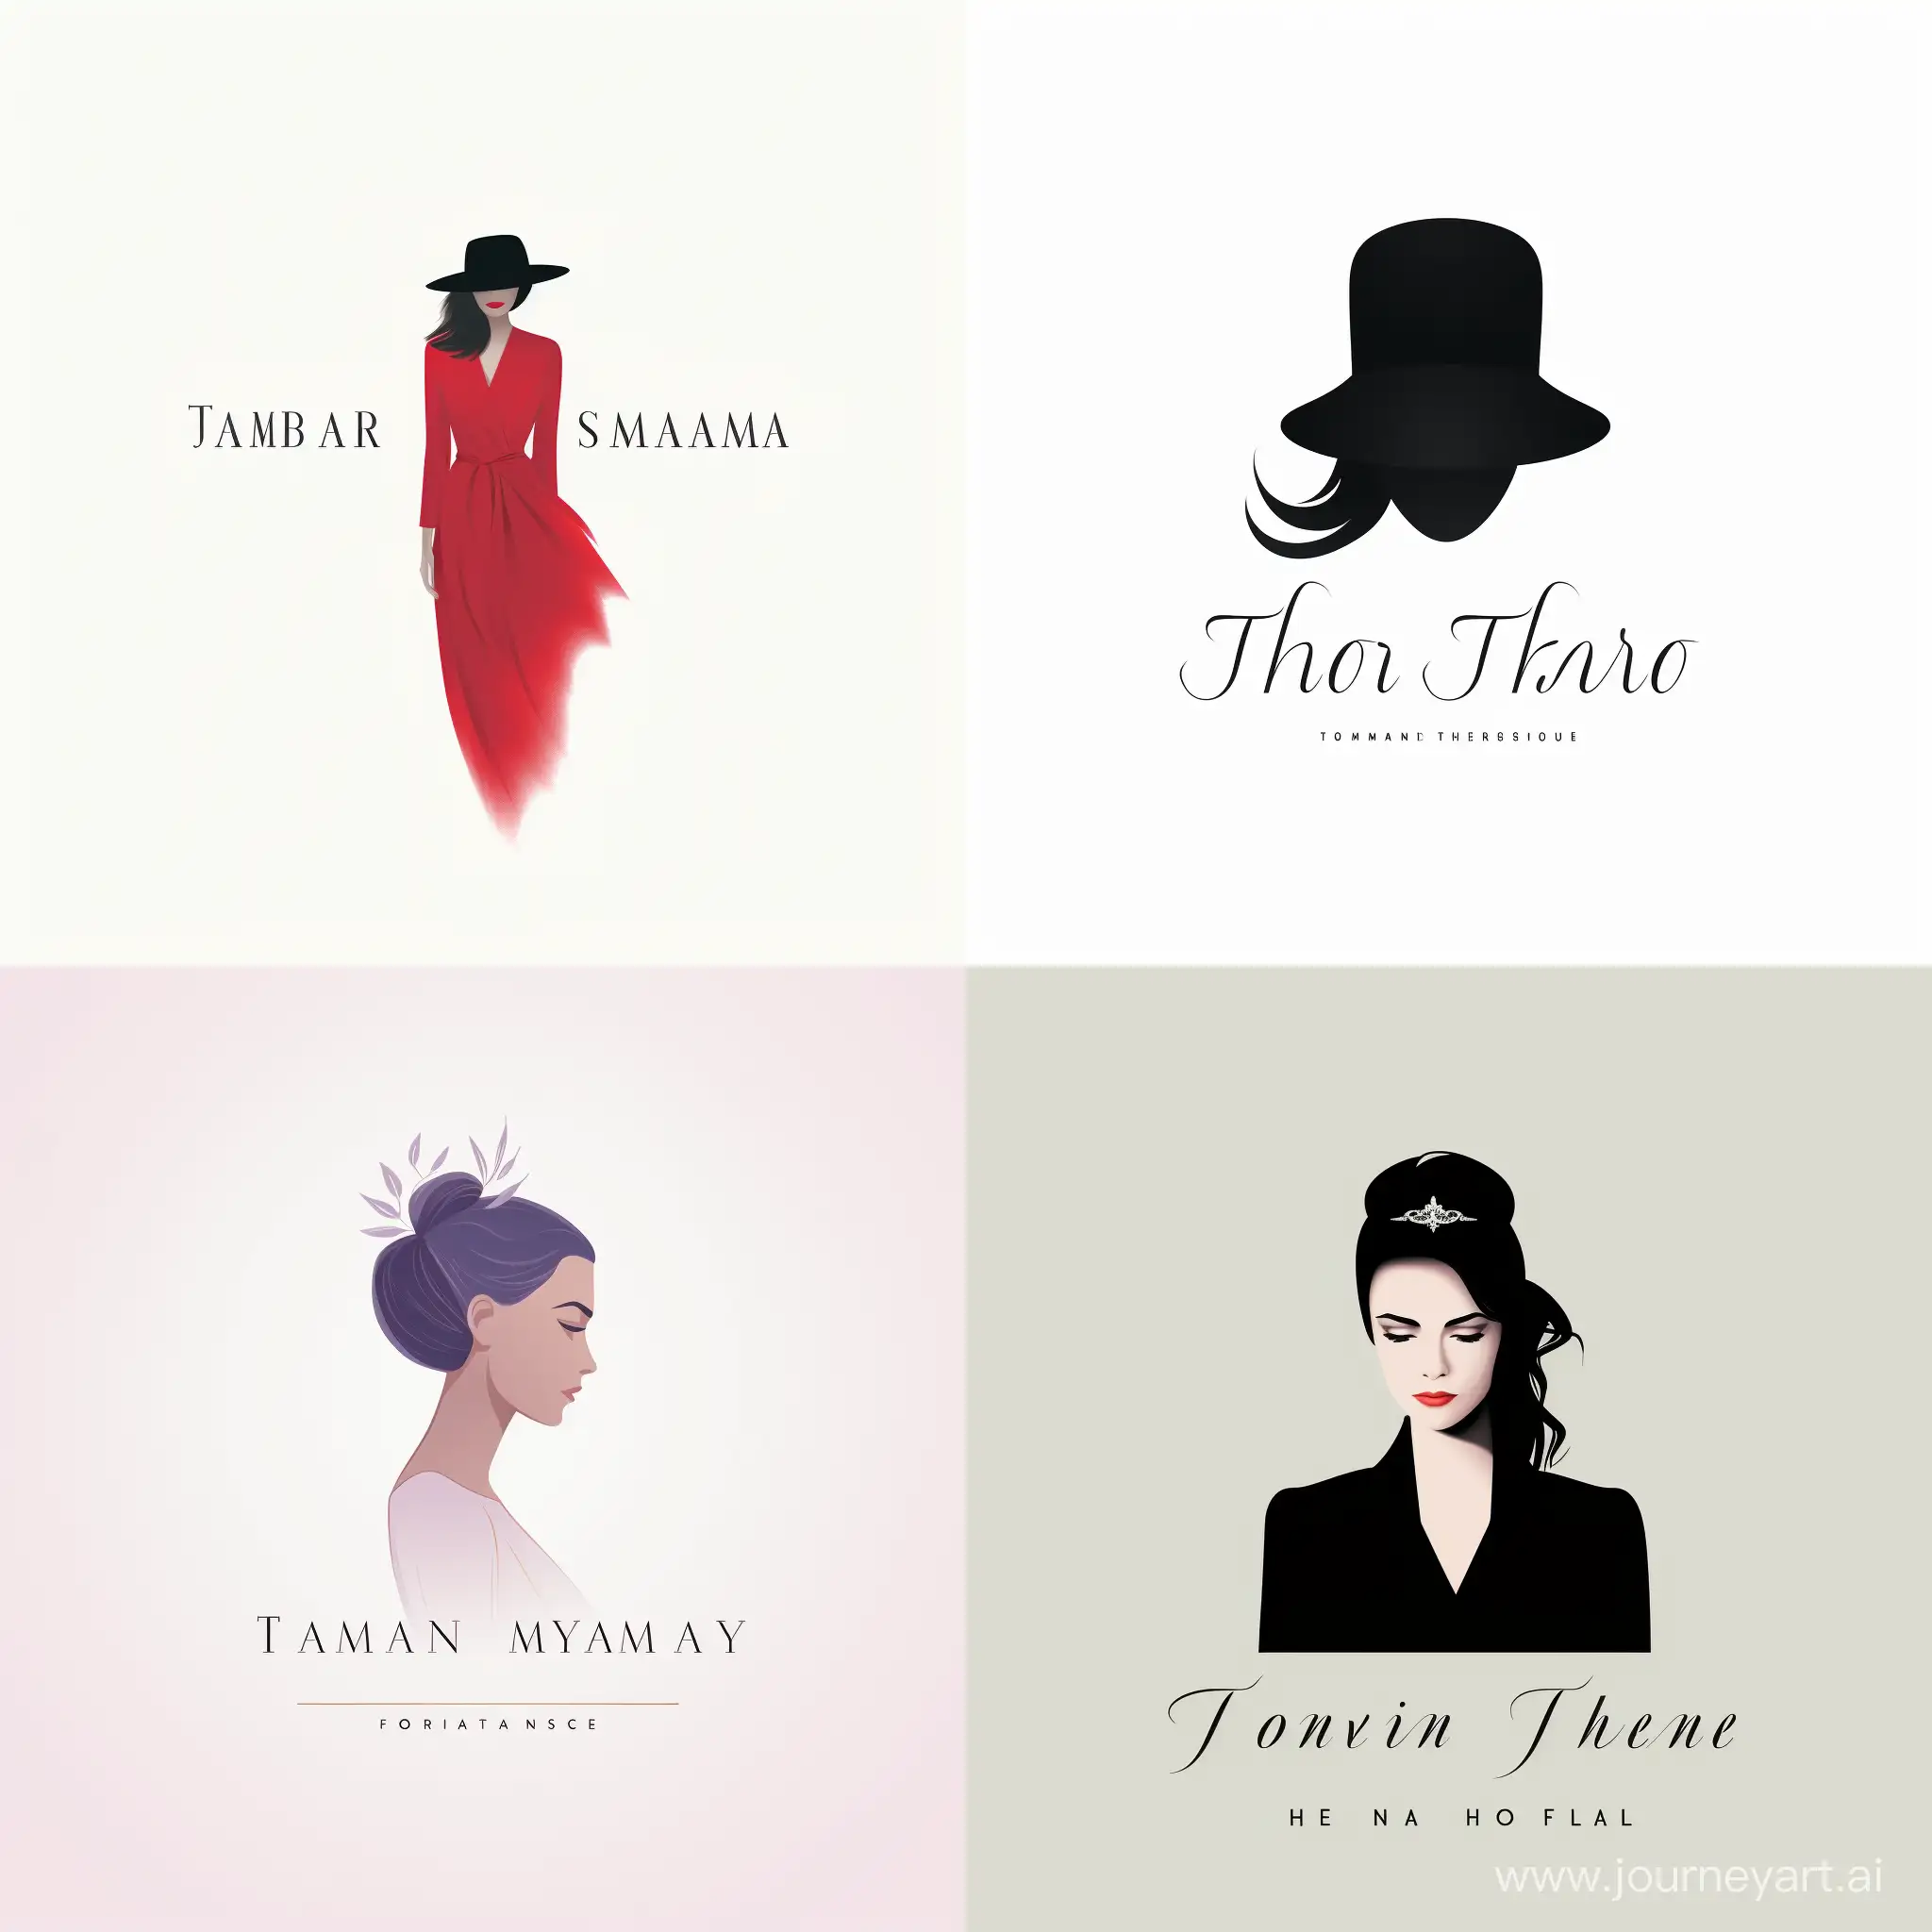 Create a minimal logo for me with the name of the woman of the day